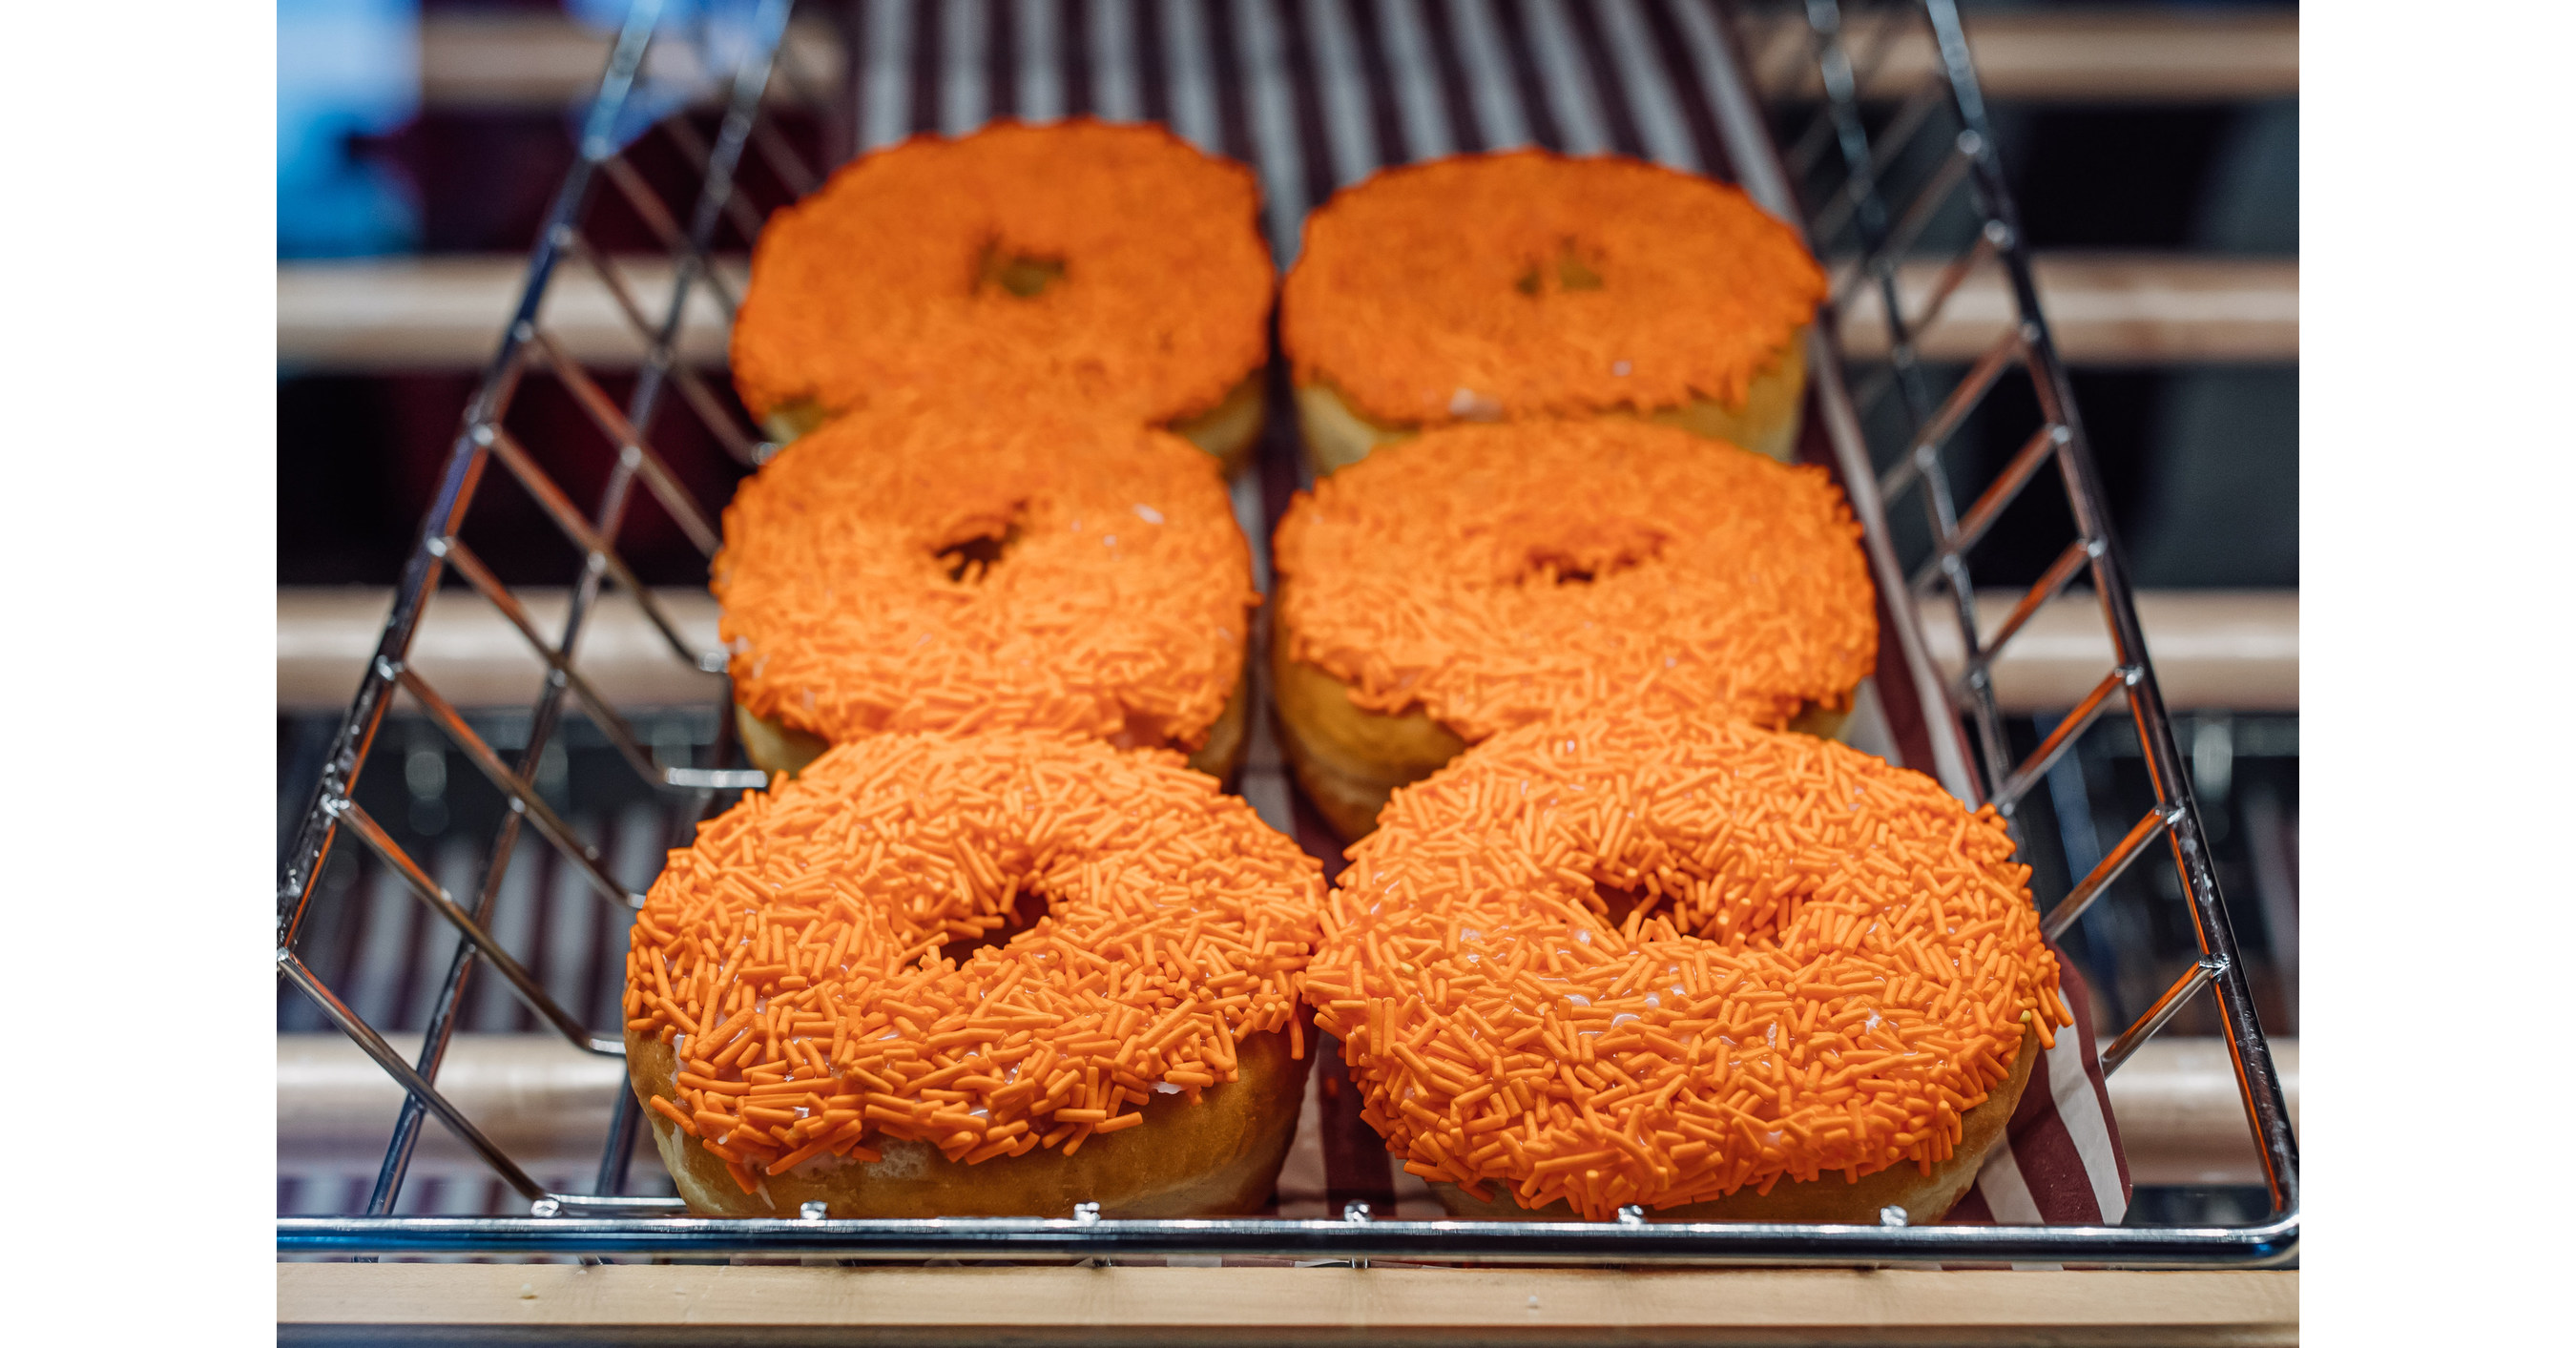 Tim Hortons Orange Sprinkle Donut campaign returns tomorrow, Sept. 30, with  100% of all fundraising donut sales being donated to Indigenous charities